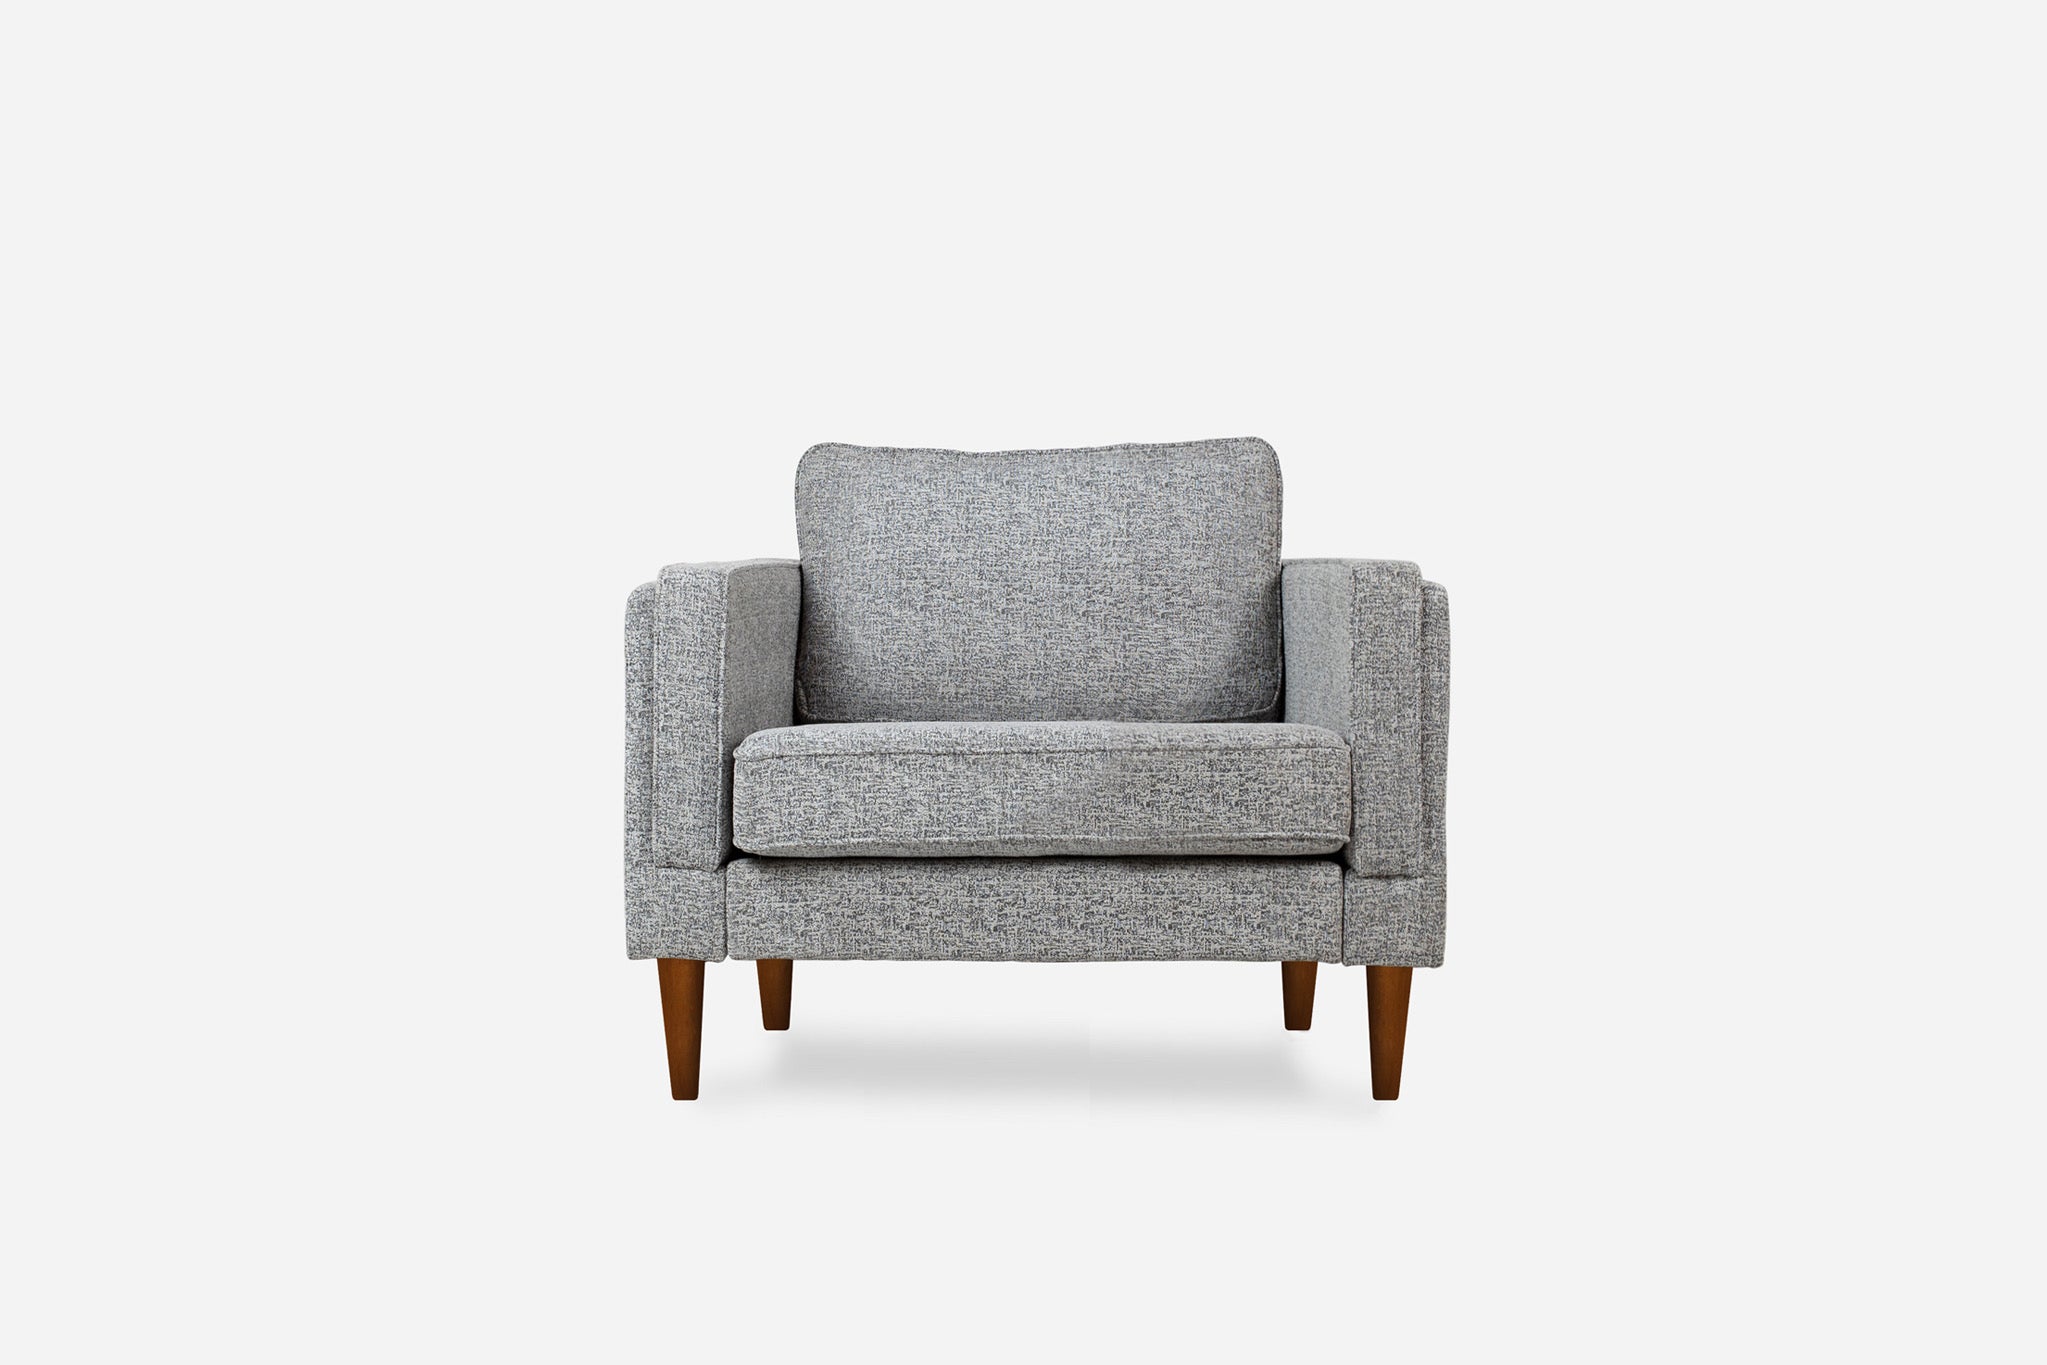 albany armchair shown in grey fabric with walnut legs